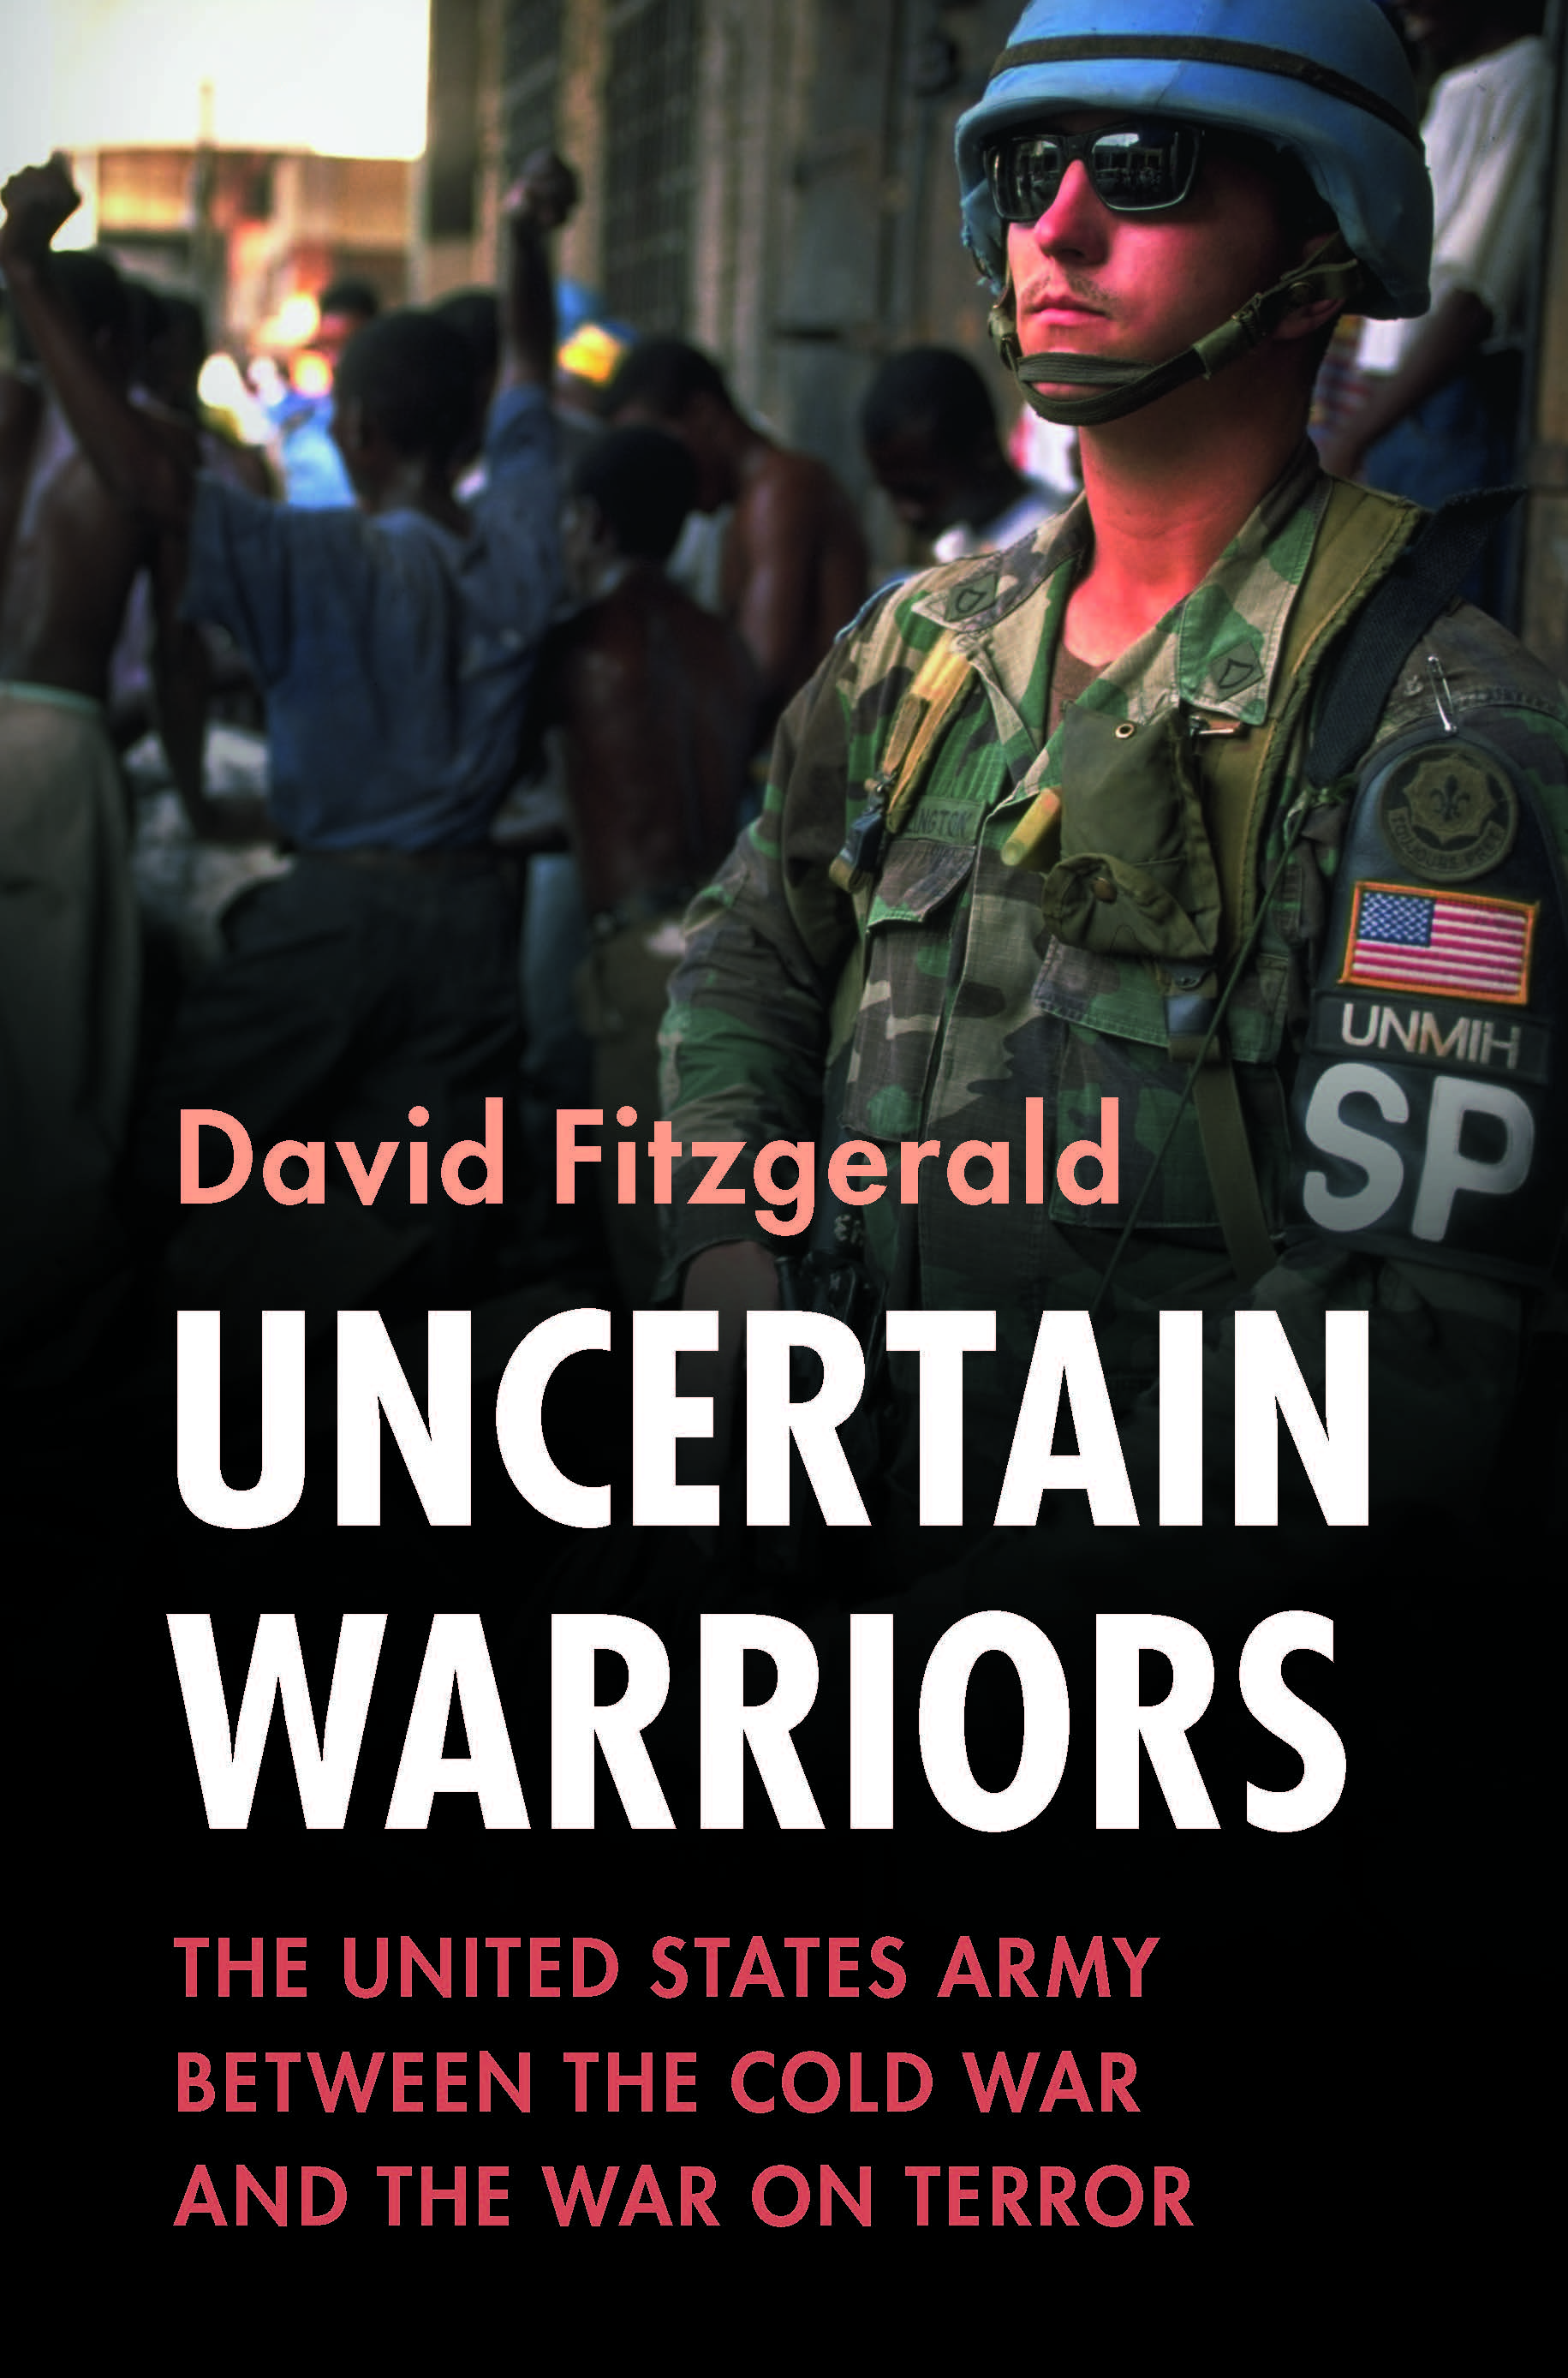 'Uncertain Warriors: The United States Army between the Cold War and the War on Terror' by David Fitzgerald.